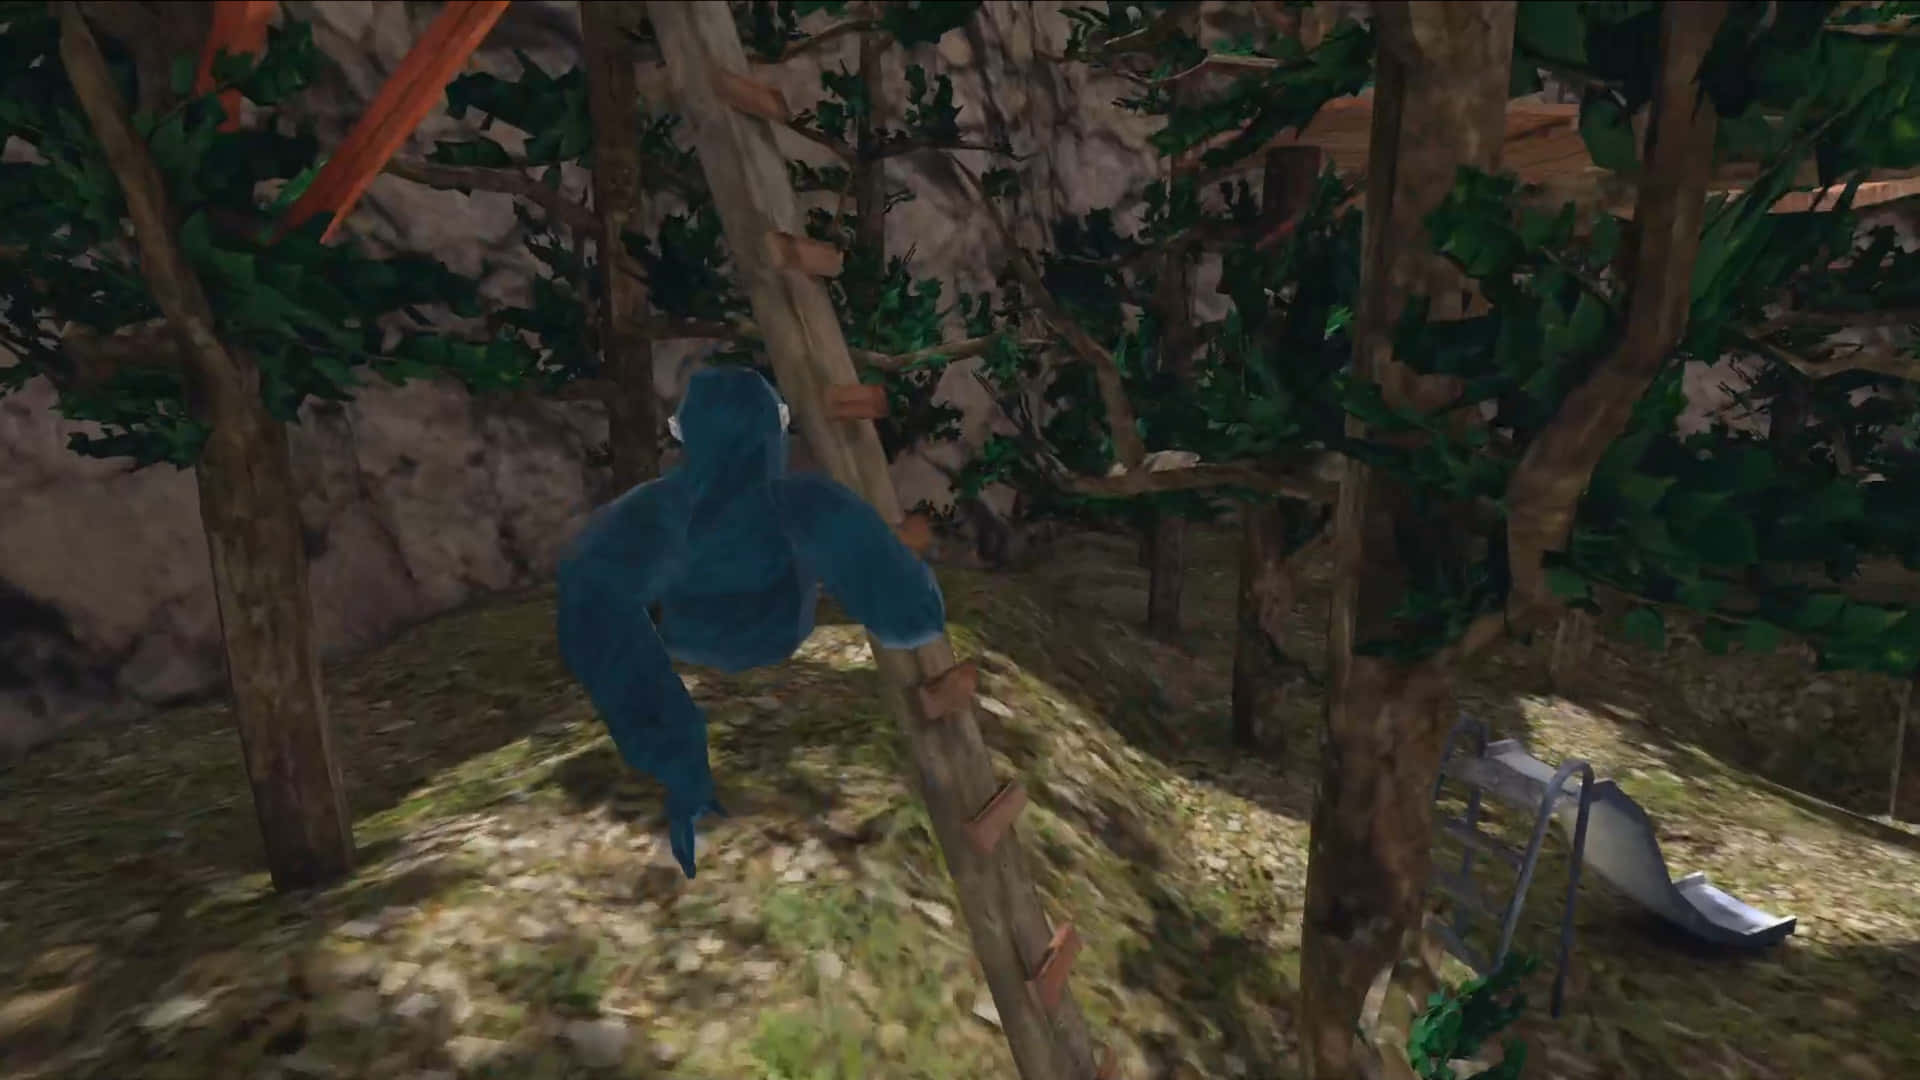 A Blue Monkey Is Climbing A Tree In A Video Game